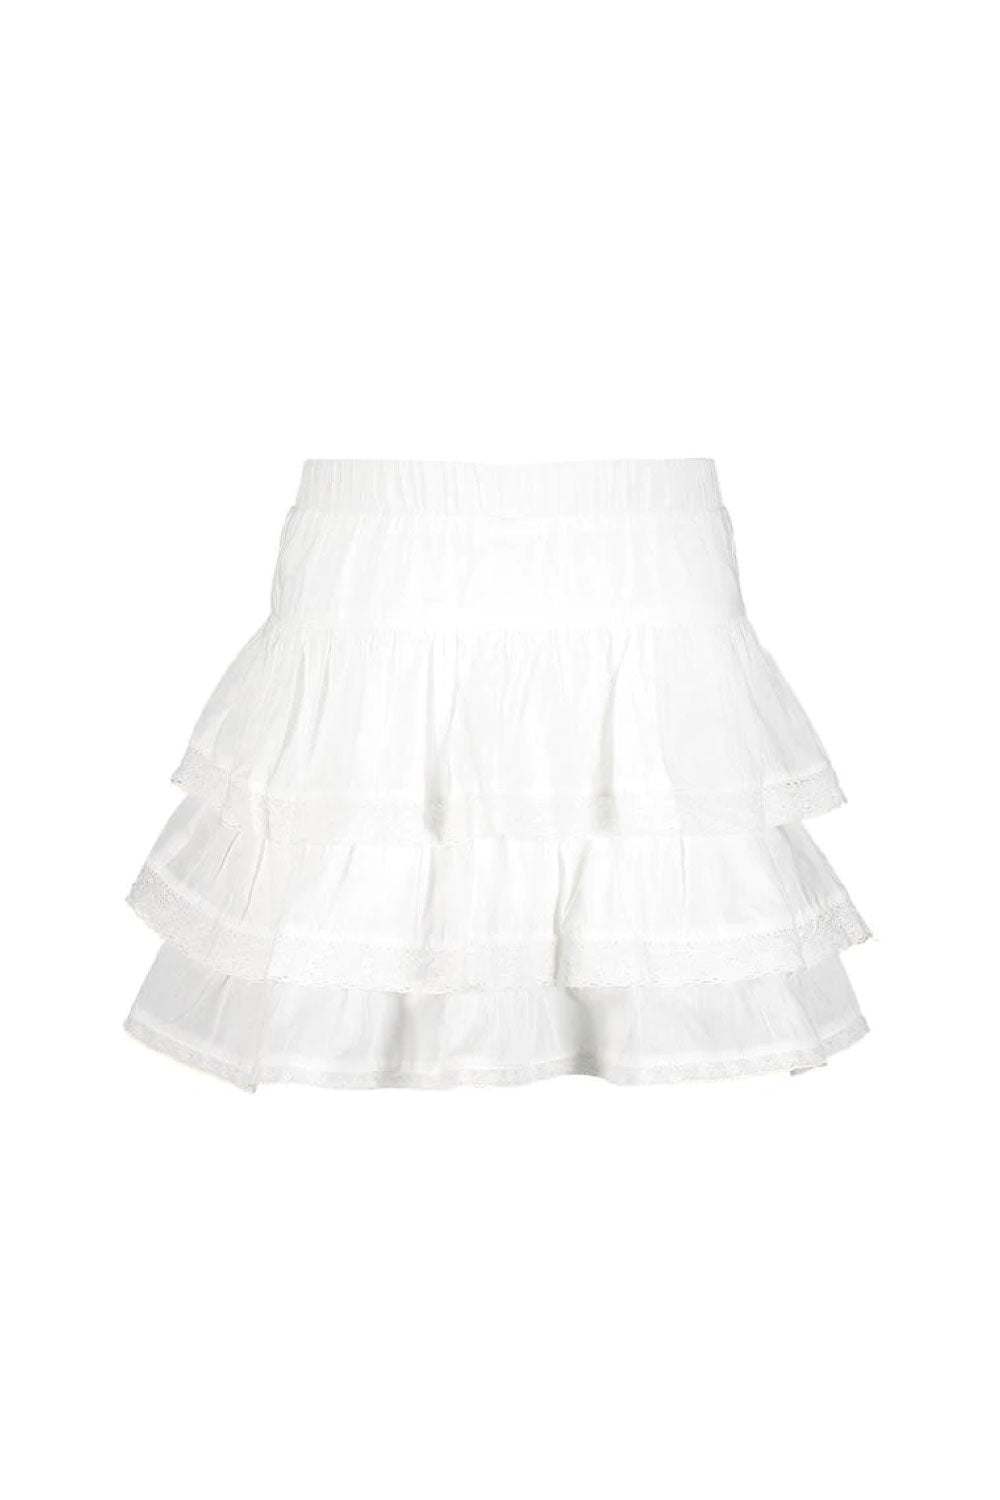 Image of the front of the Lacey Skirt in White.